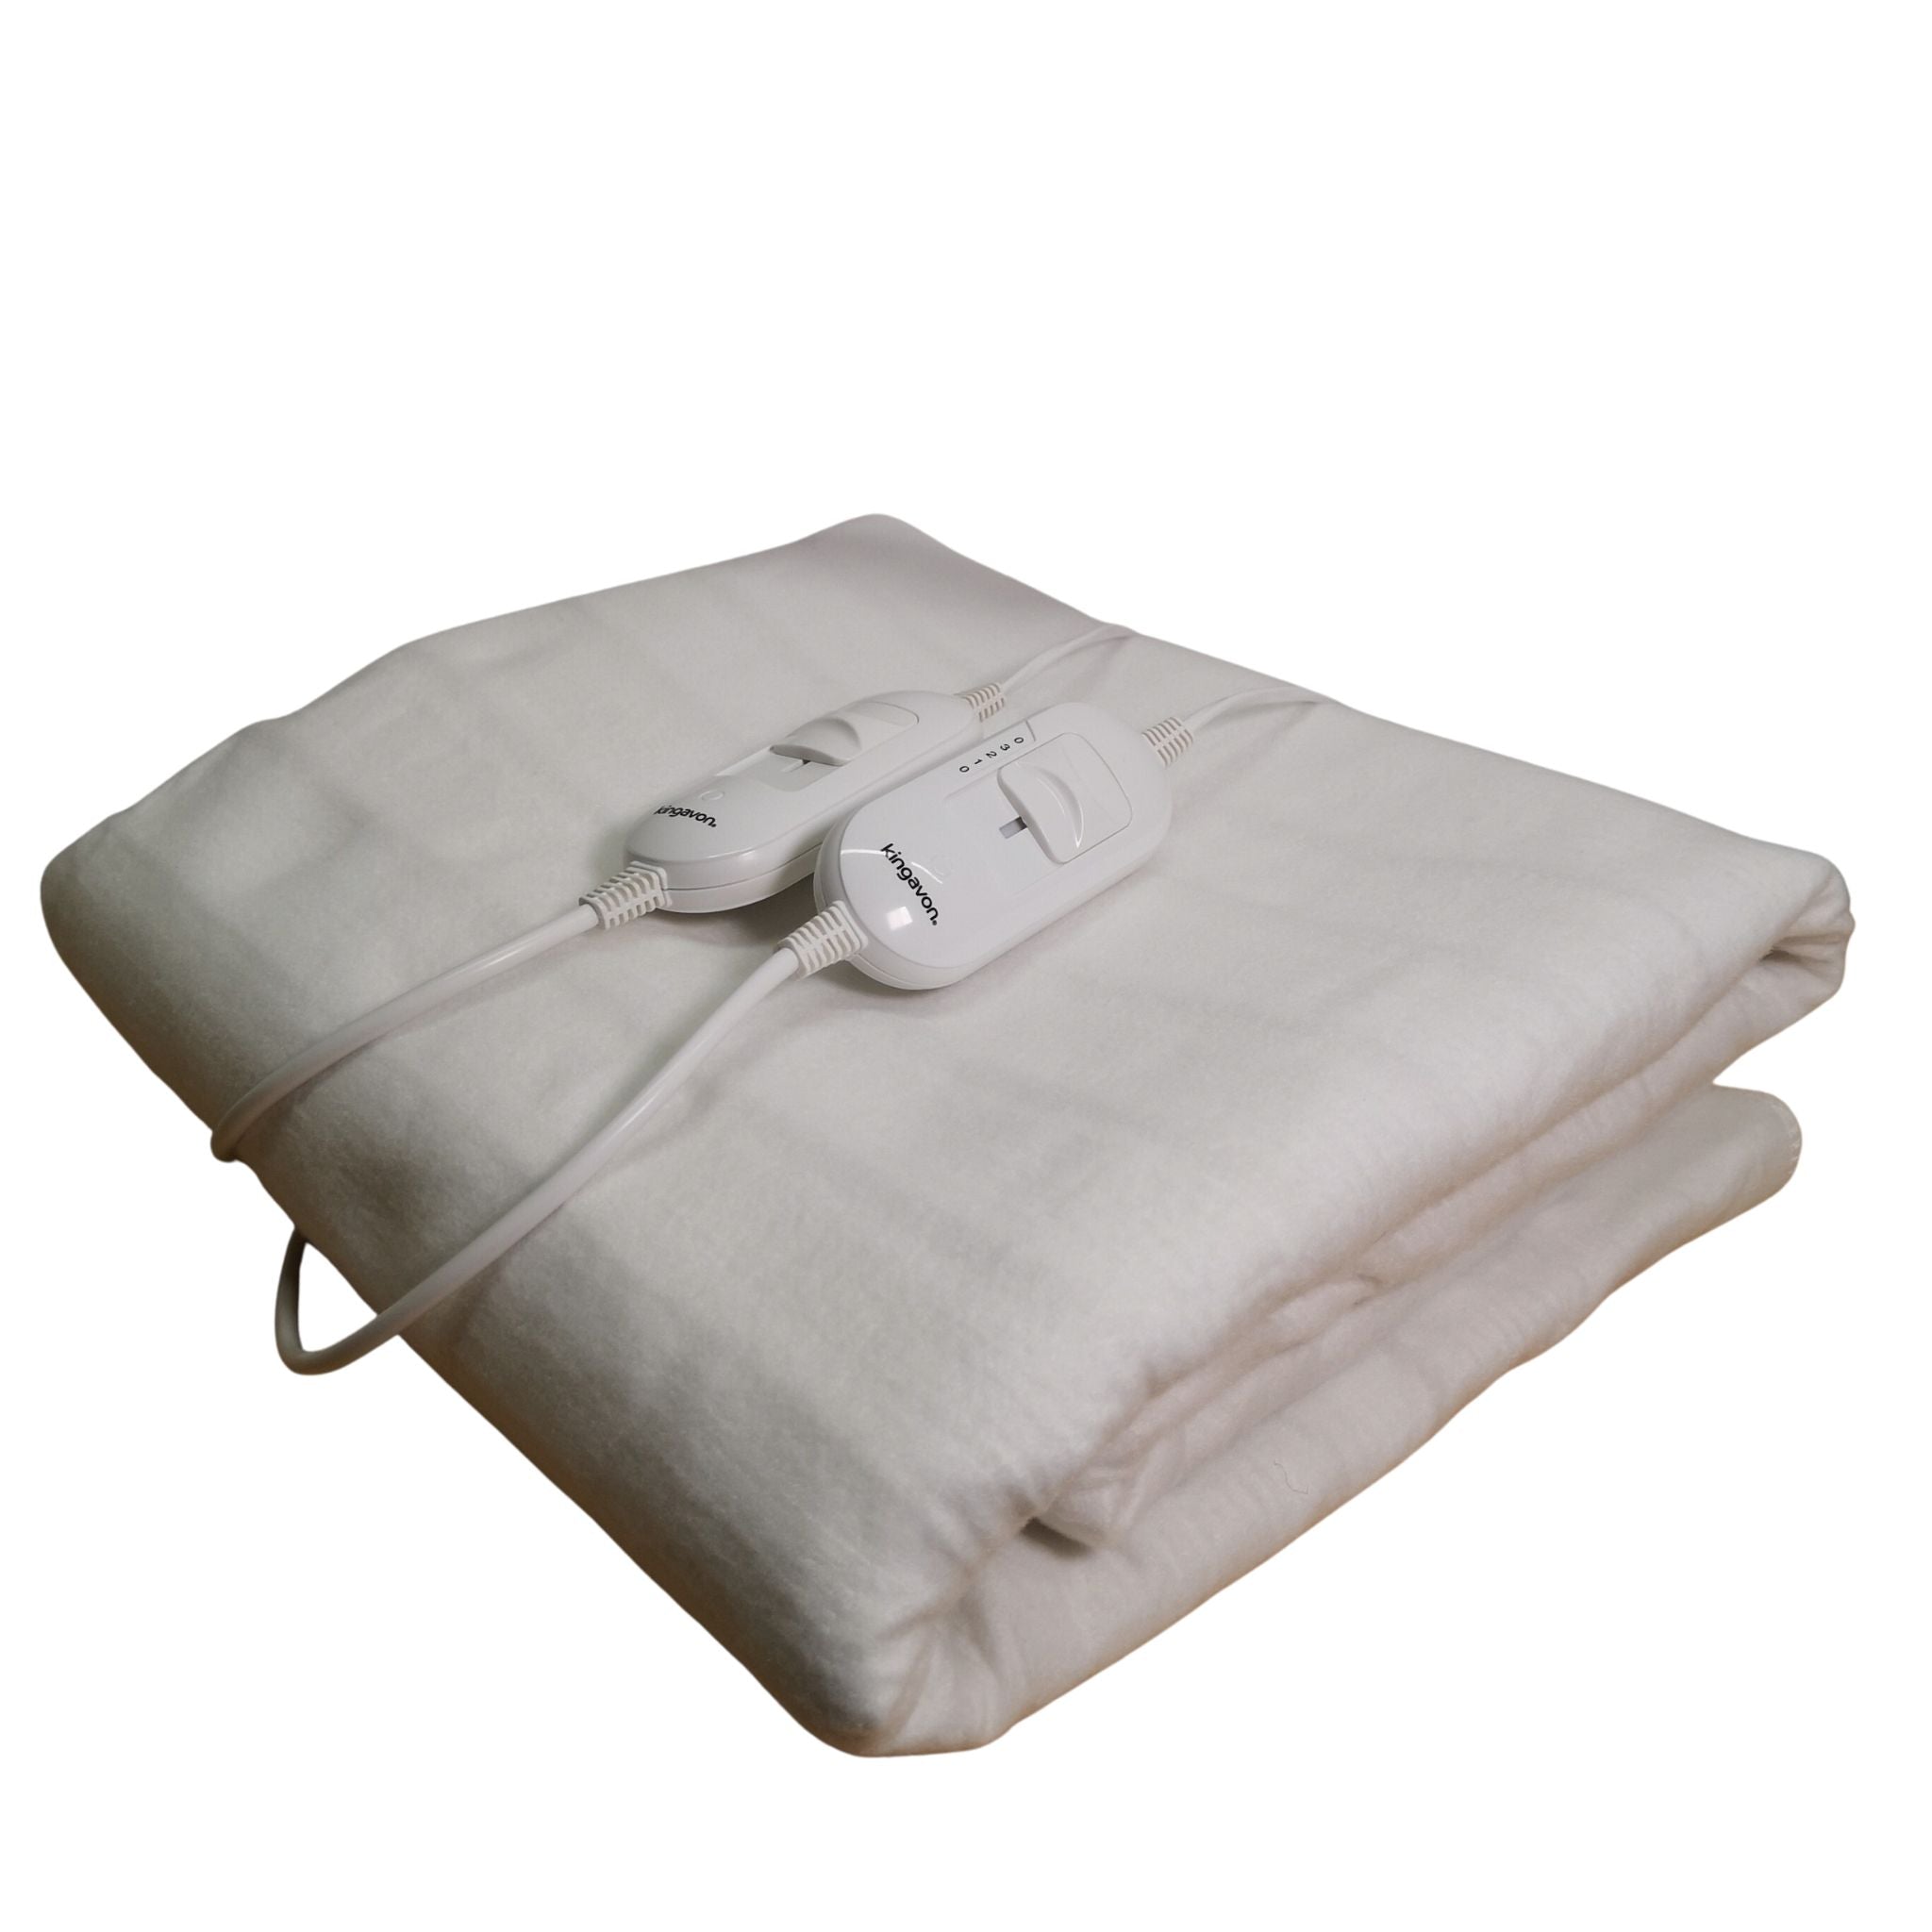 150cm 2 x 60W King Size White Electric Blanket Throw with Temperature Settings